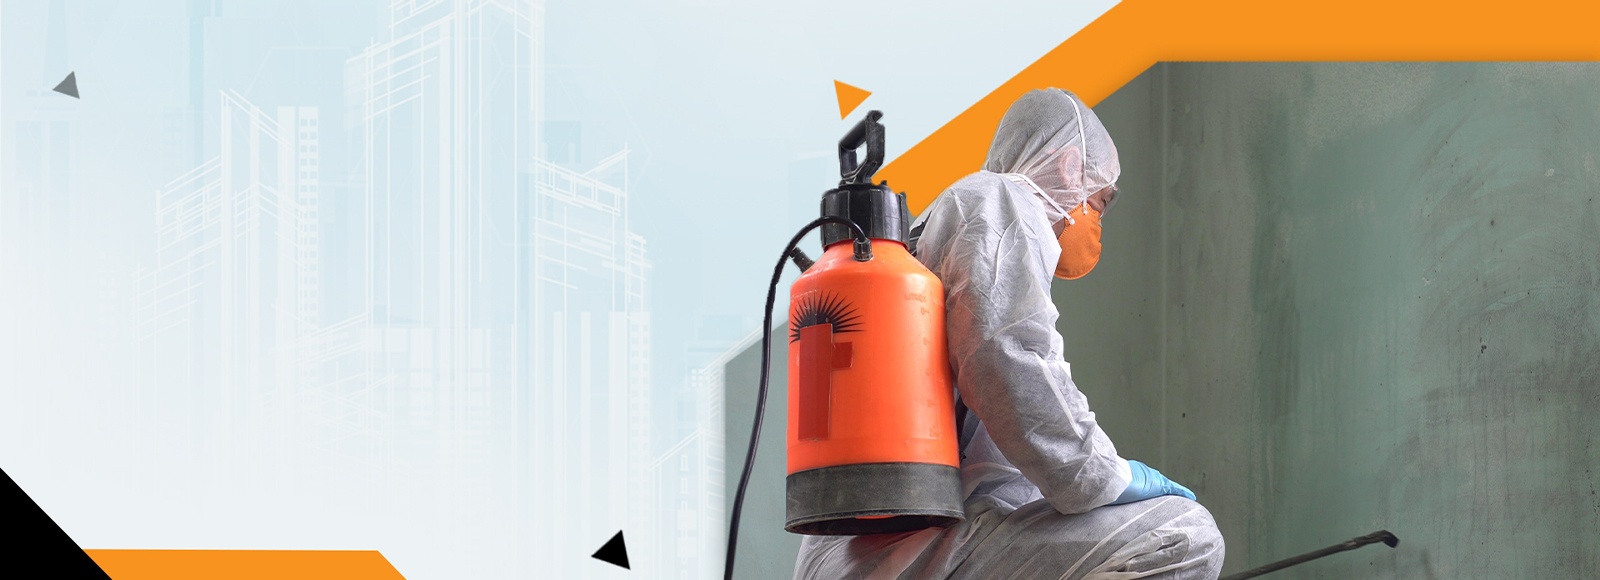 Qualified Mould Remediation technicians are trained to work on commercial, residential, and industrial projects in Ottawa